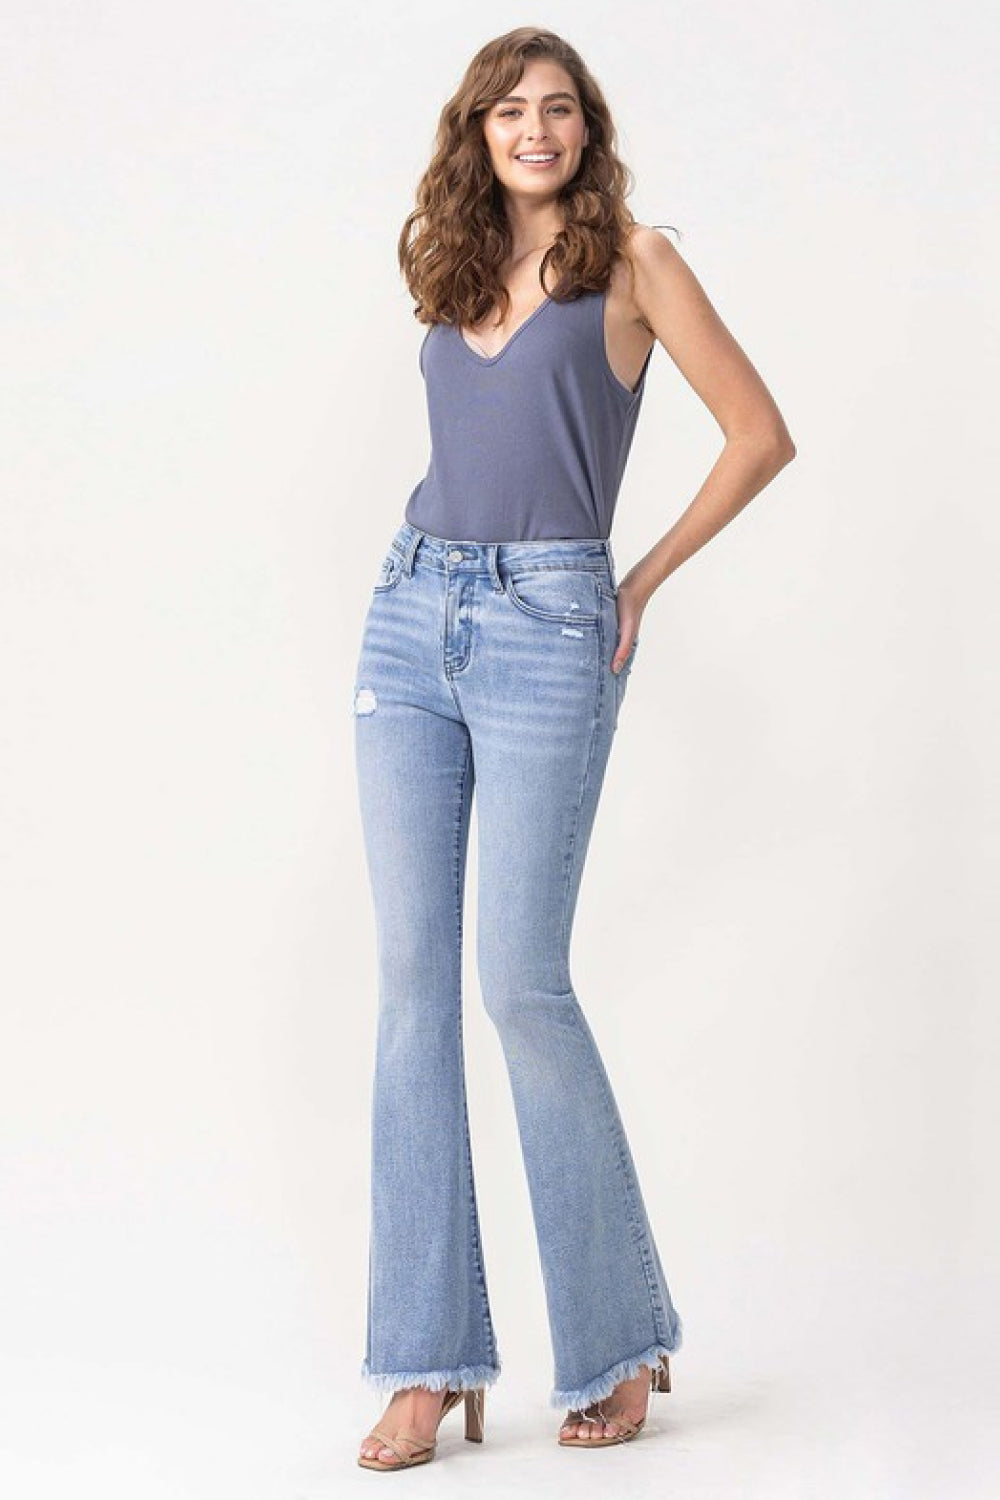 Lovervet Full Size Evie High Rise Fray Flare Jeans - Cheeky Chic Boutique